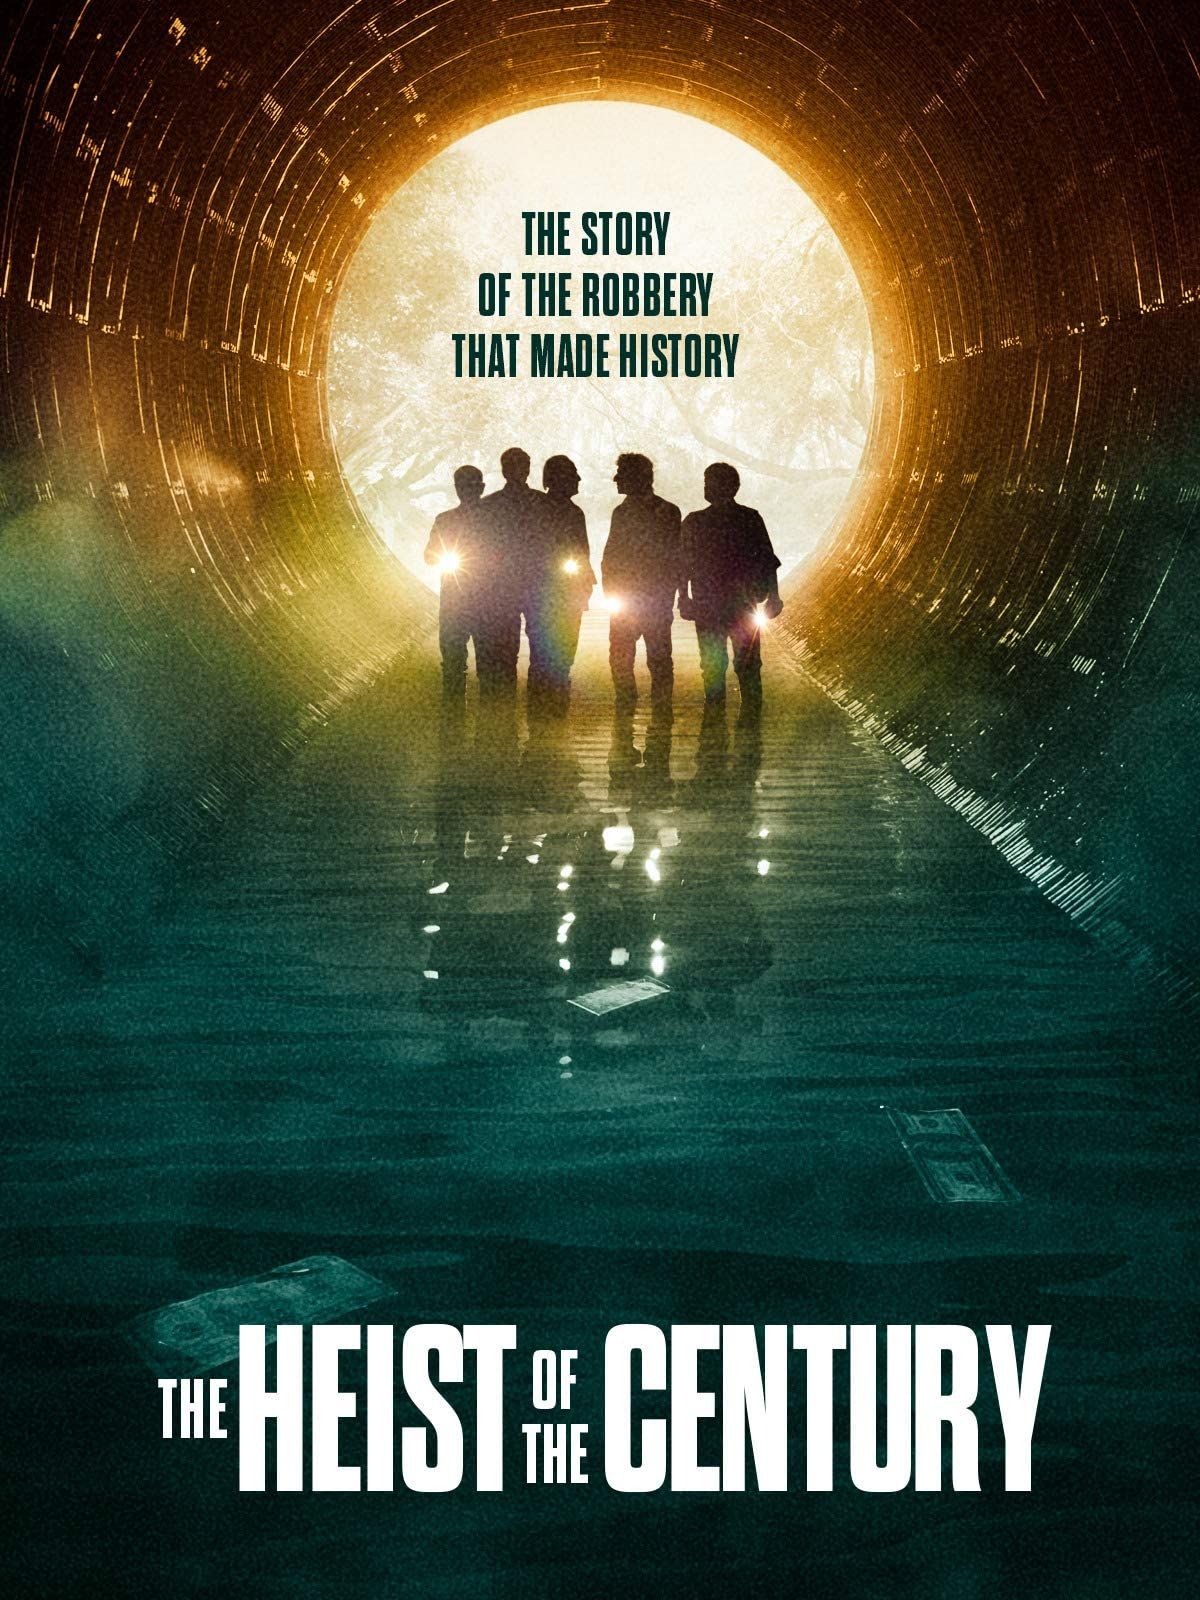 The Heist of the Century (2020) Hindi Dubbed BluRay download full movie